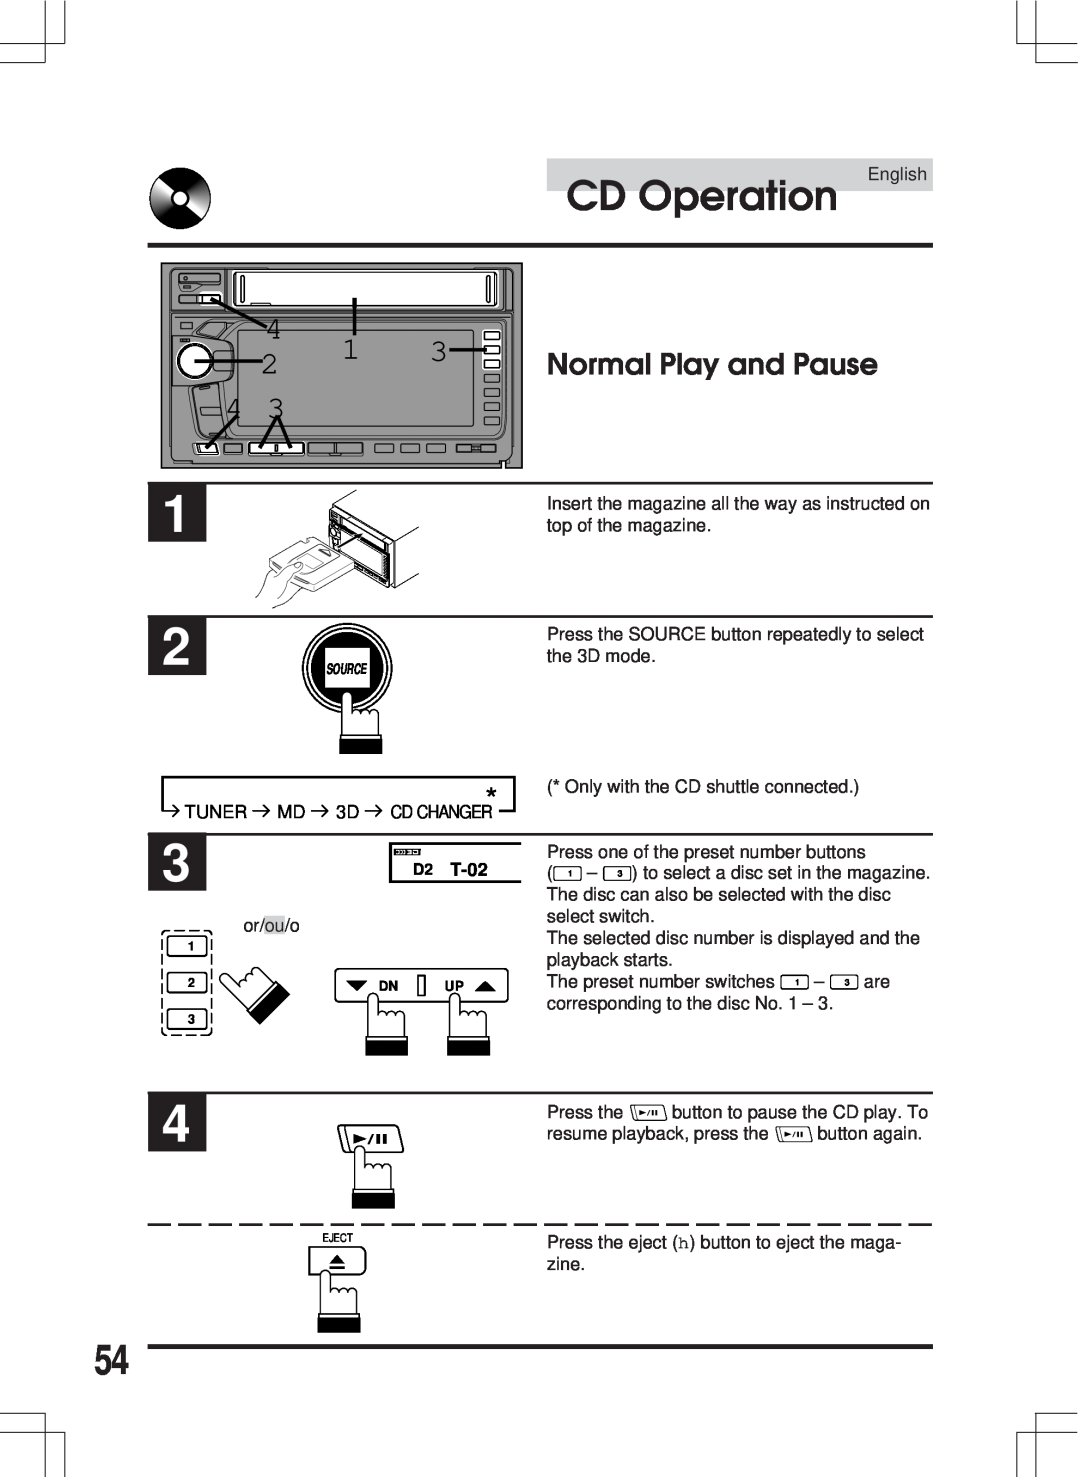 Alpine MDA-W890 owner manual Normal Play and Pause, CD Operation English, D2 T-02 